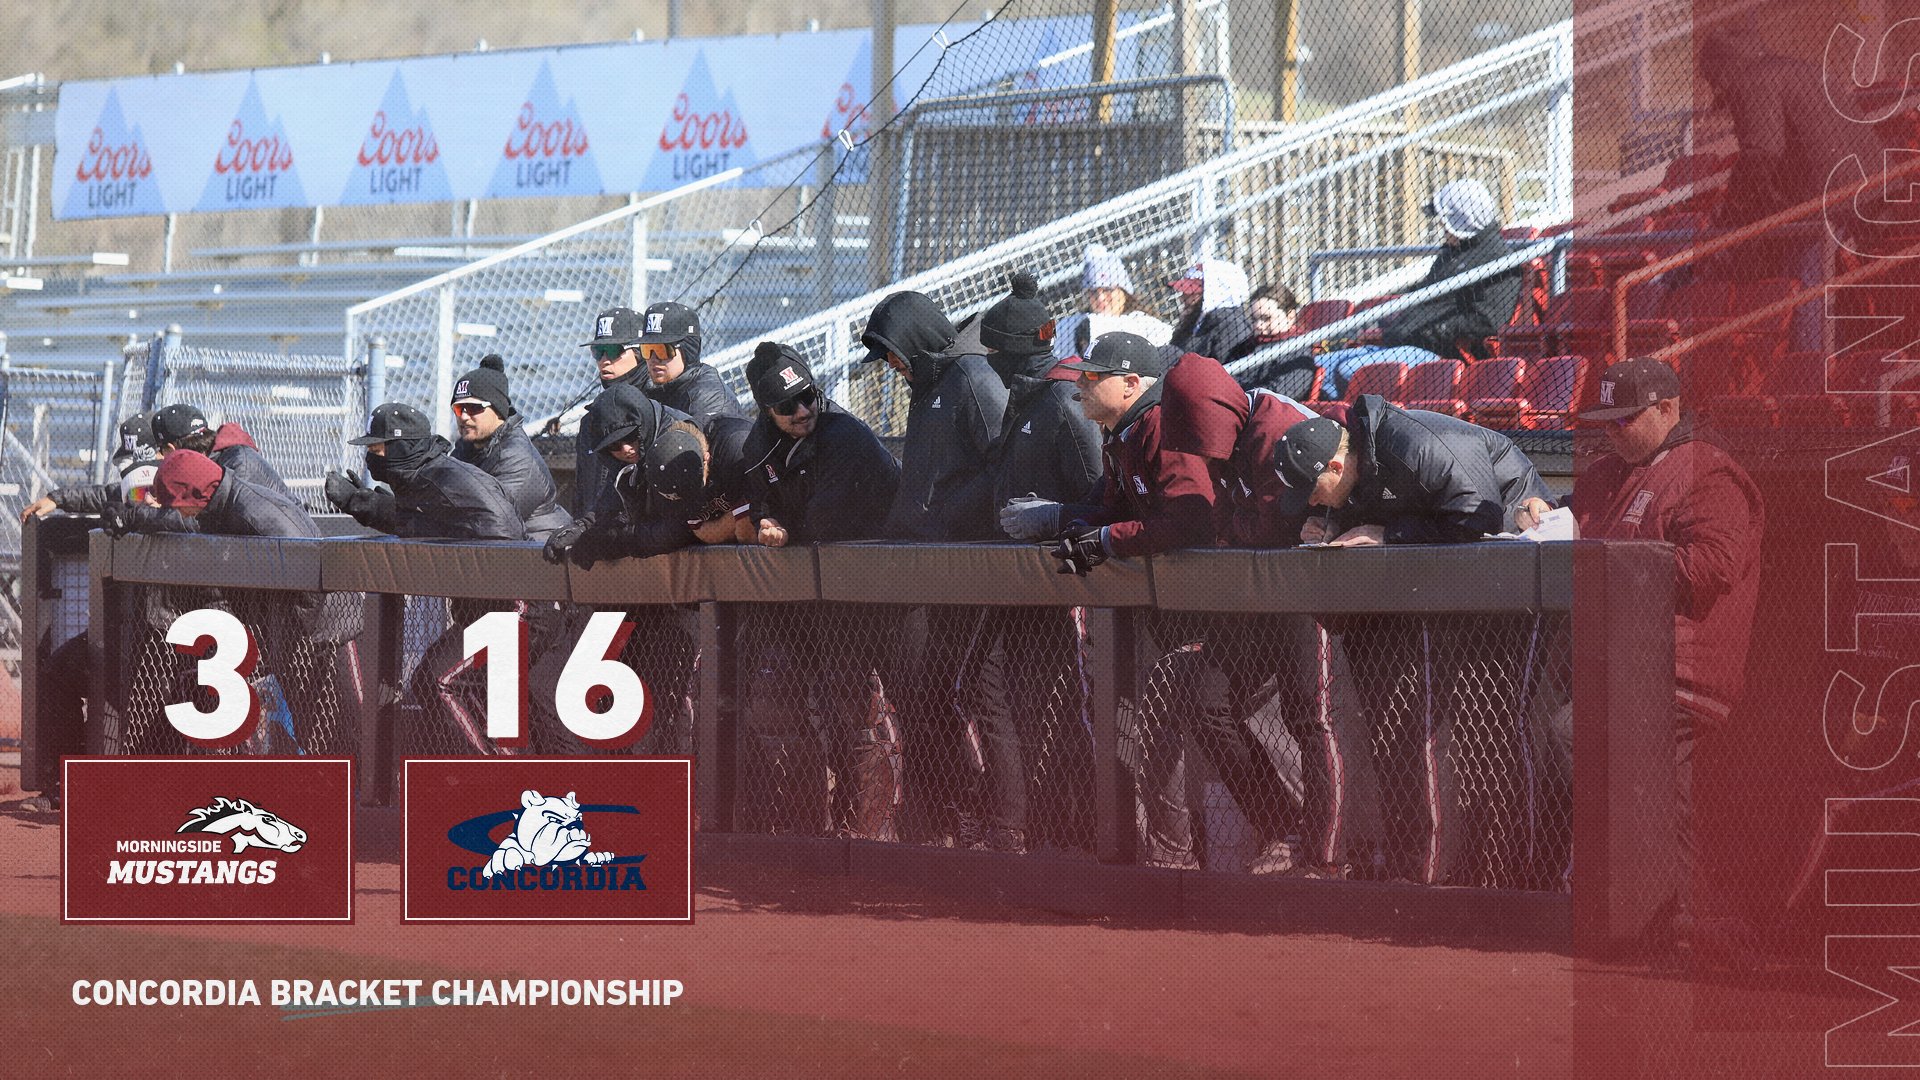 Mustangs fall to Concordia in bracket championship, 16-3